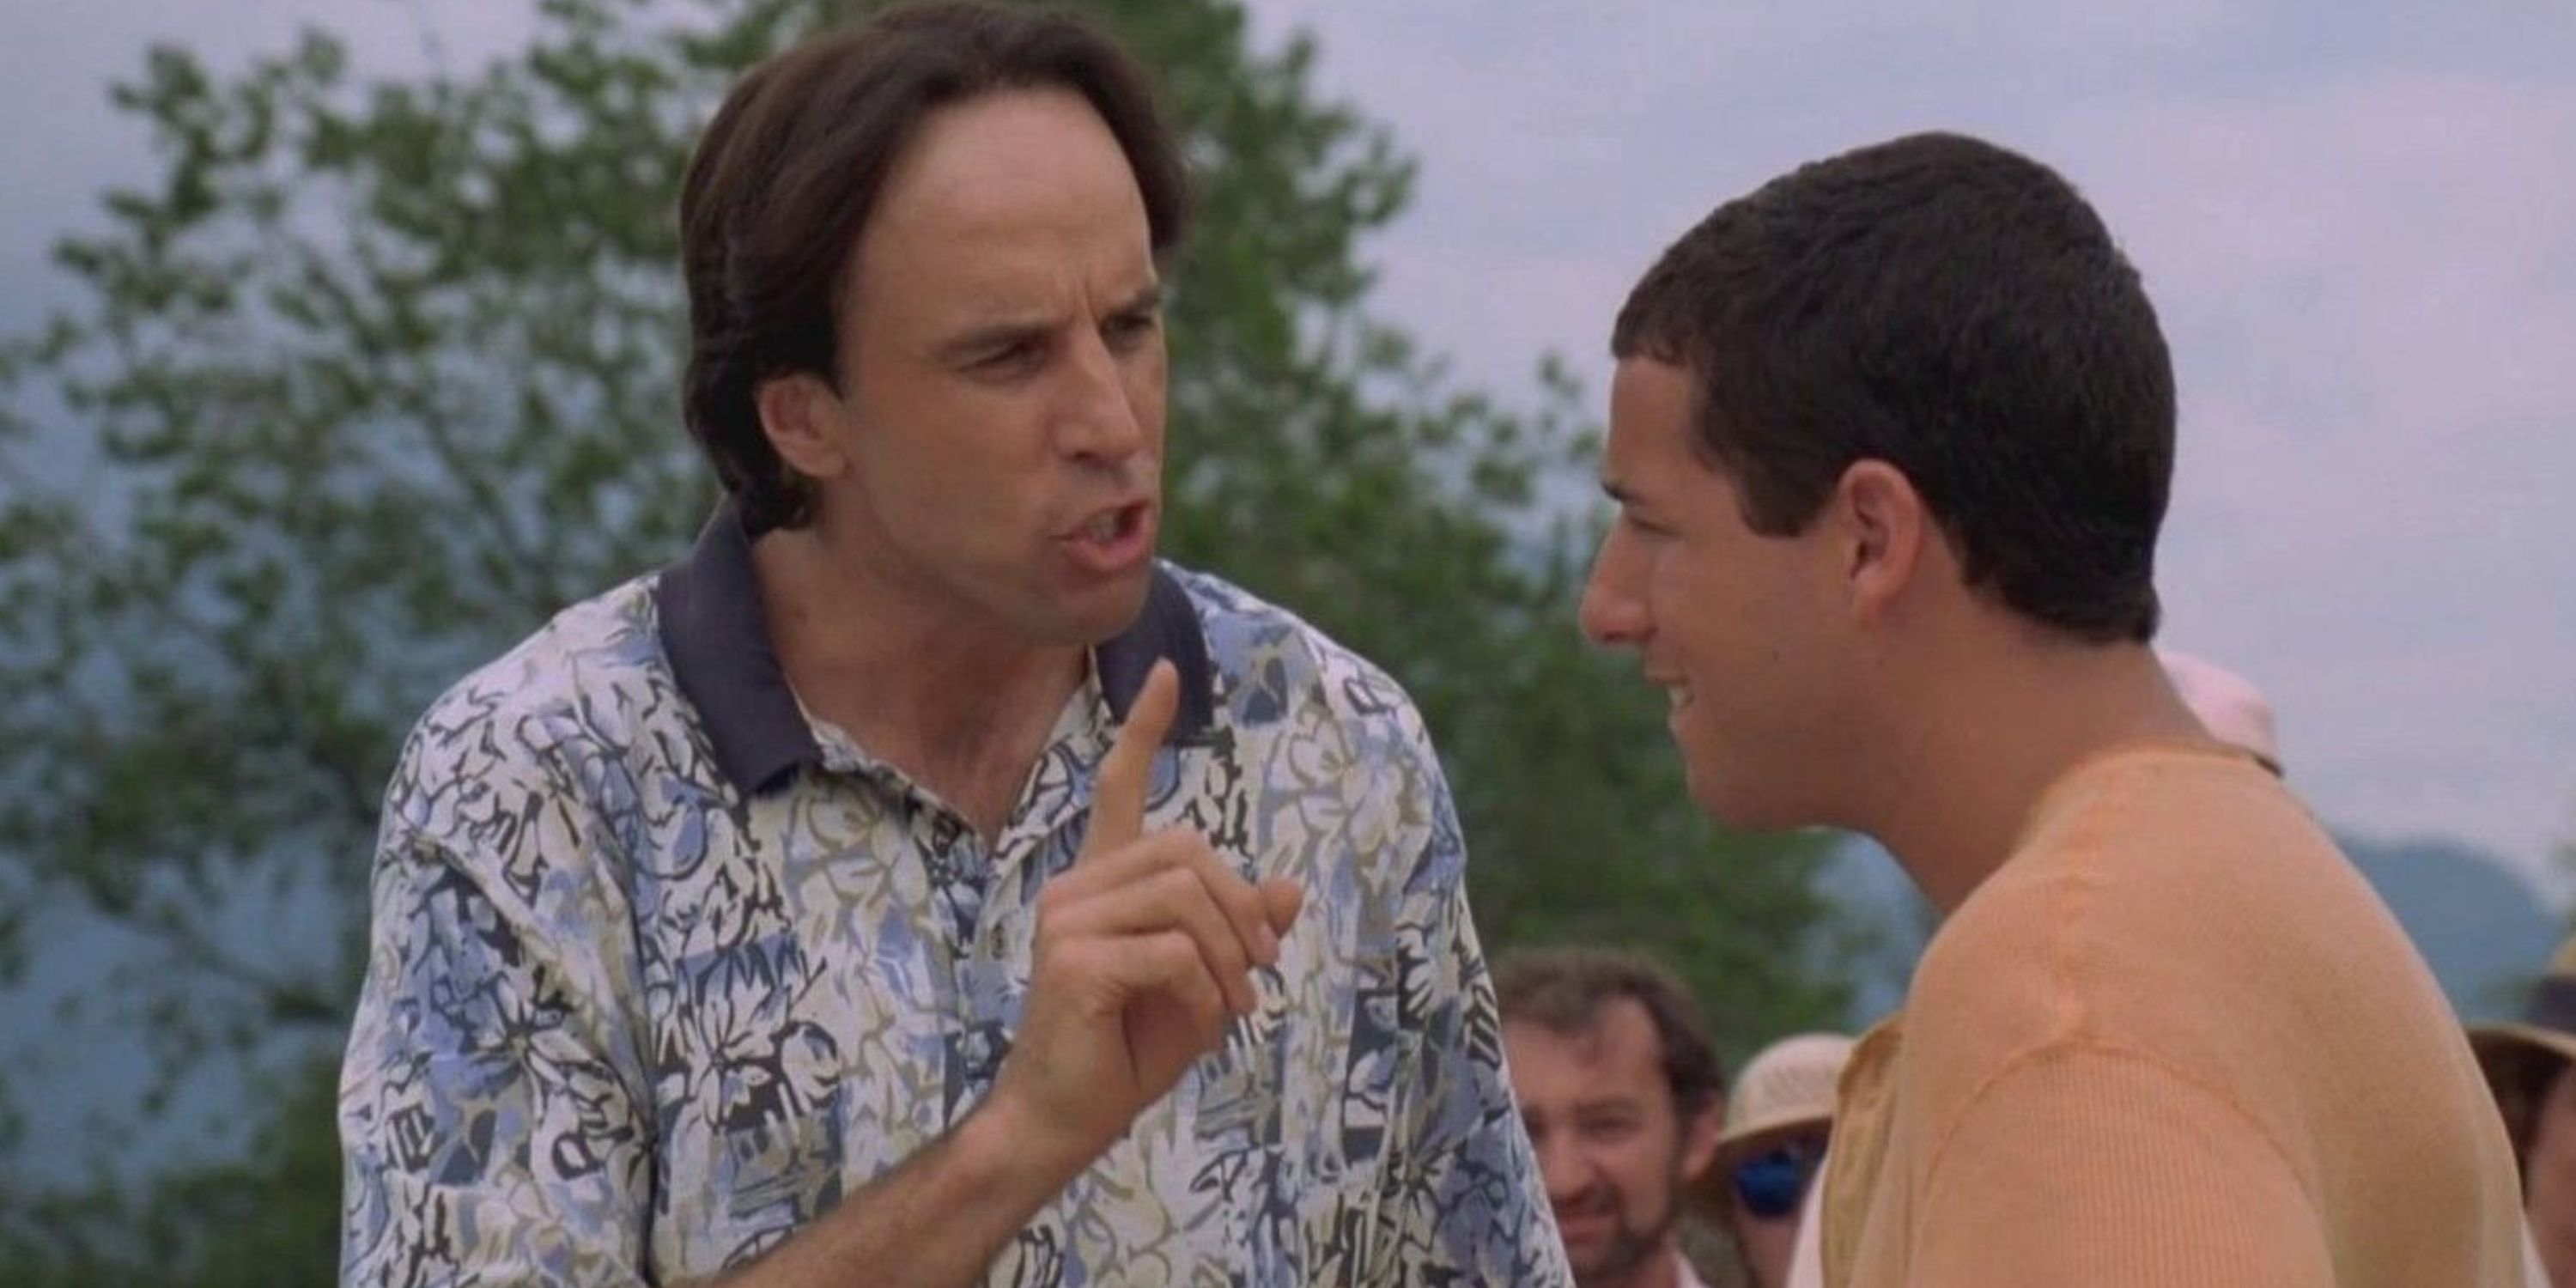 Gary Potter talking to Happy on the course in Happy Gilmore with his finger up